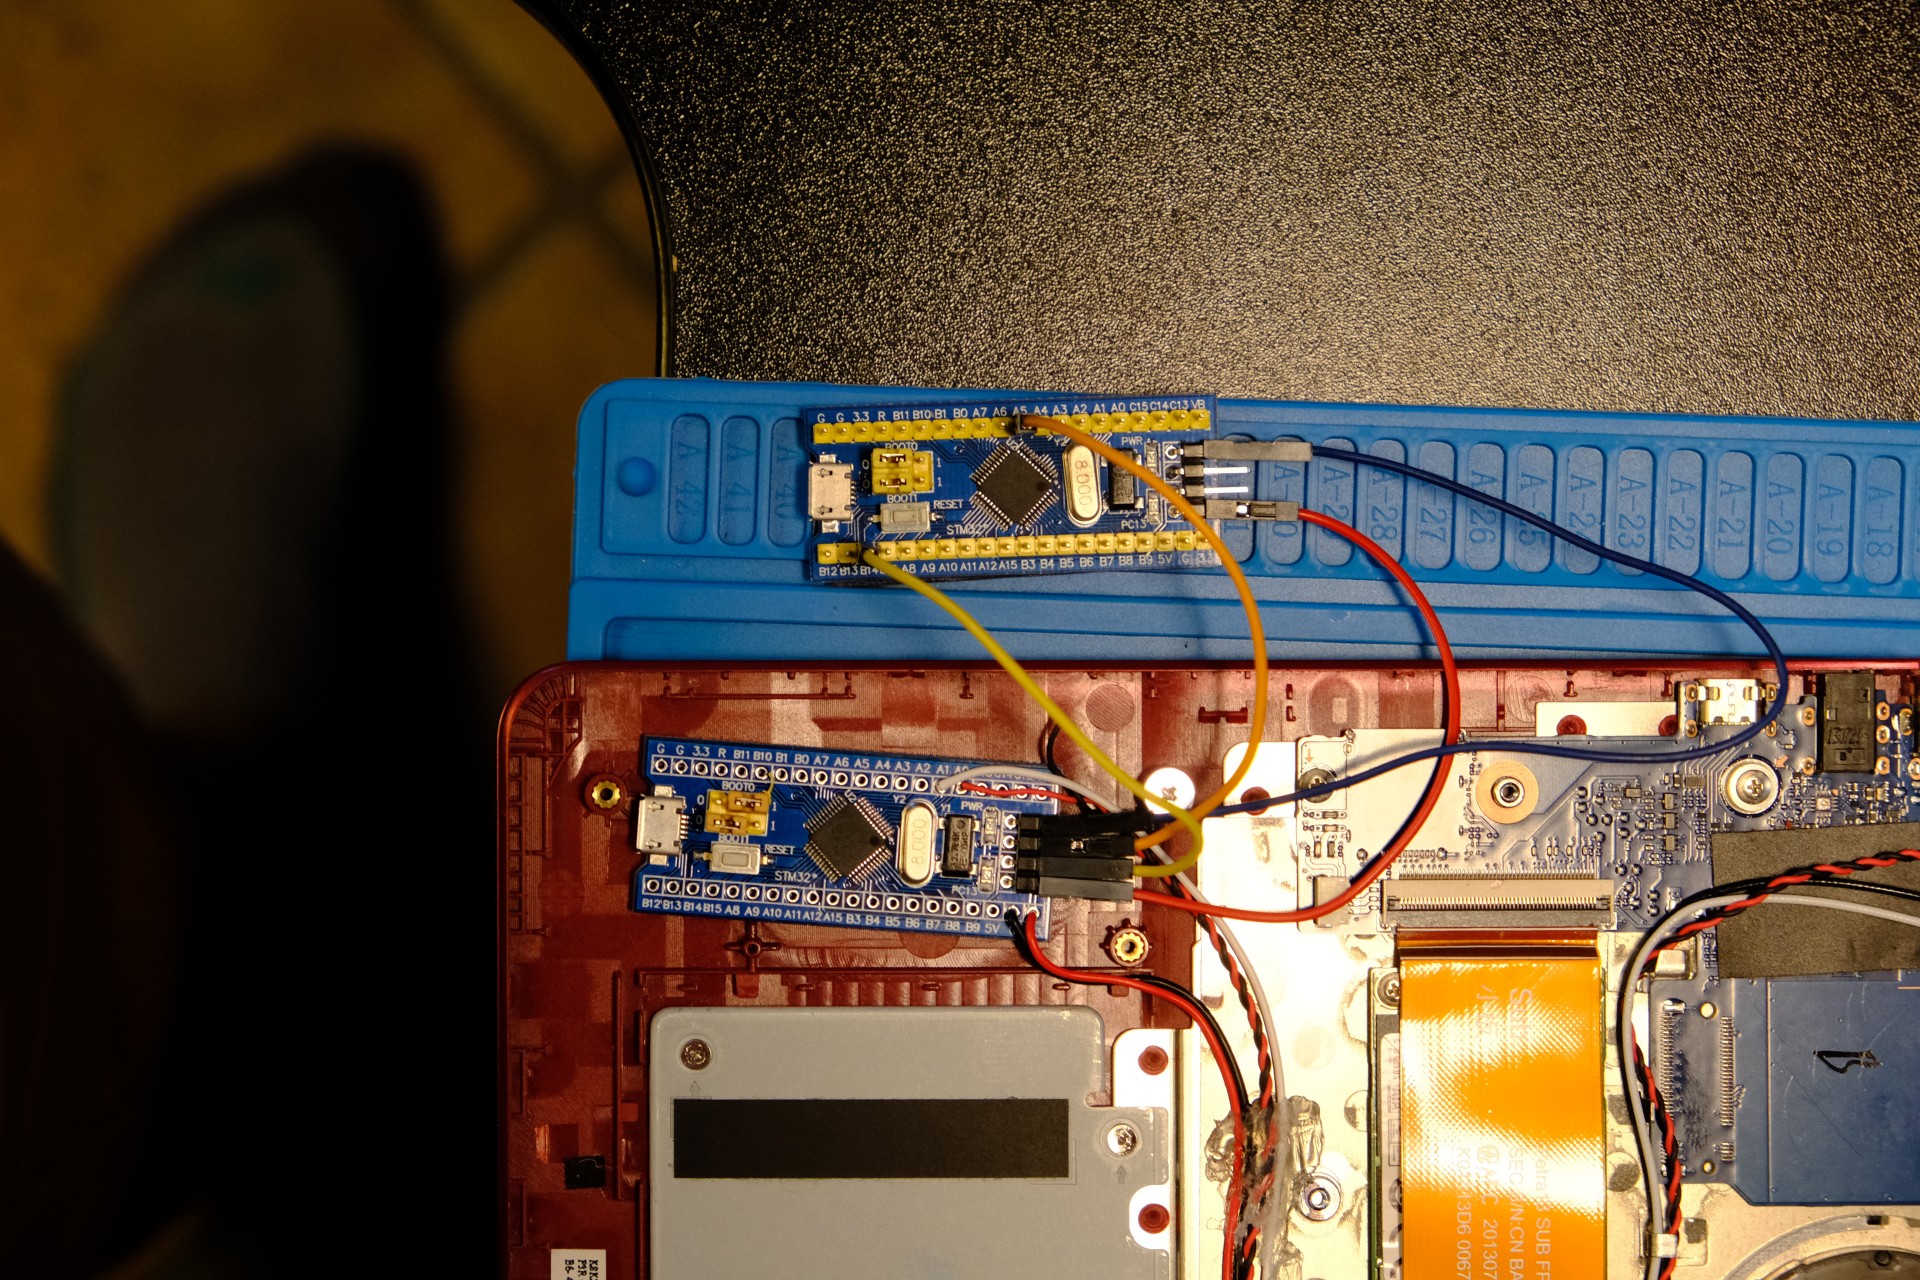 Flash the firmware to the microcontroller